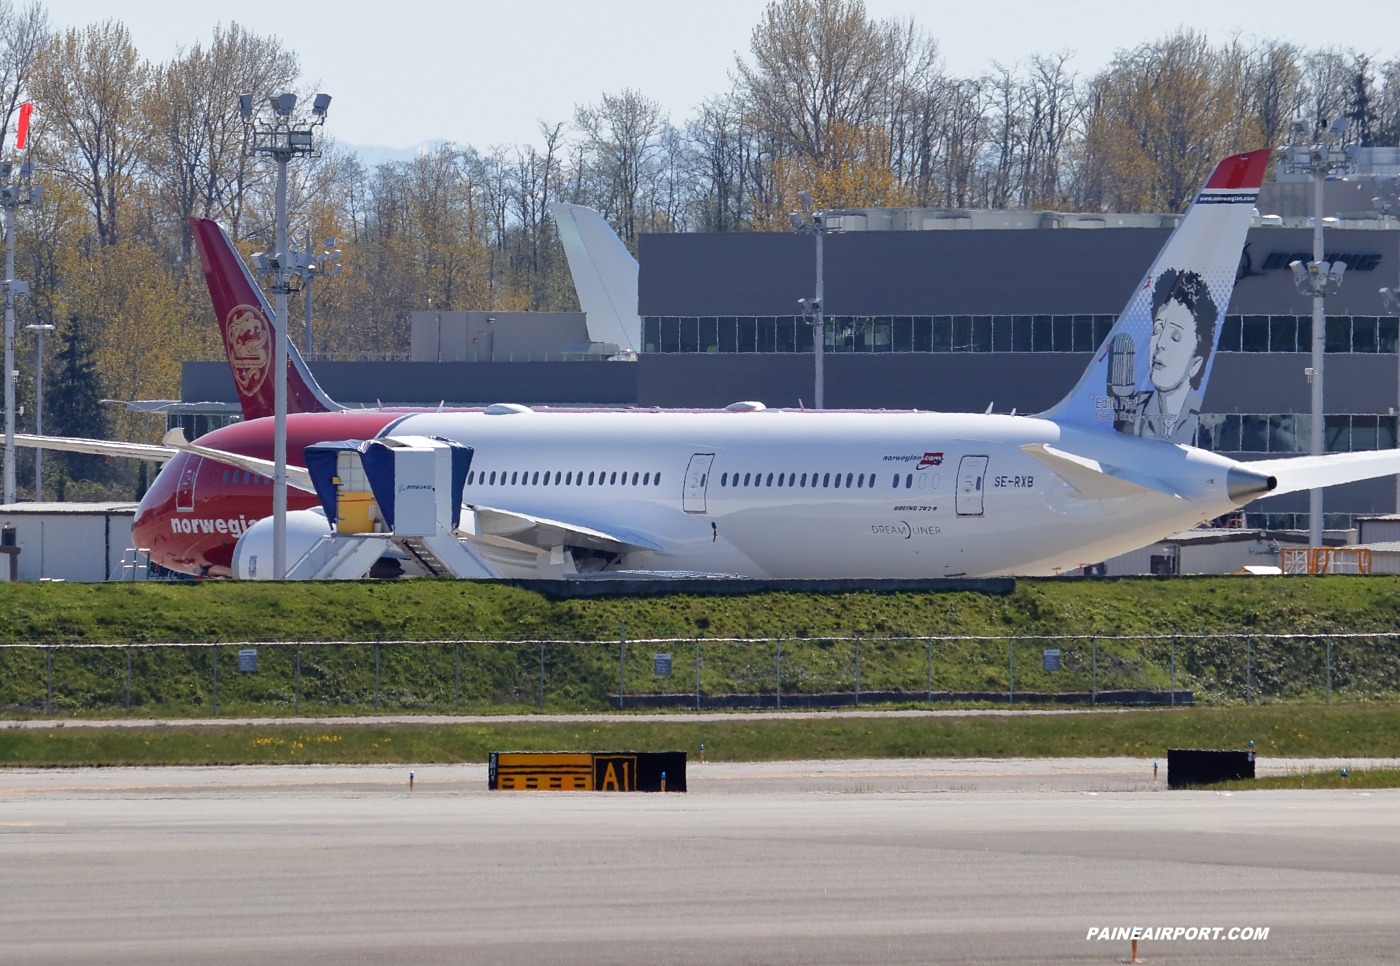 Norwegian 787-9 SE-RXB at Paine Field